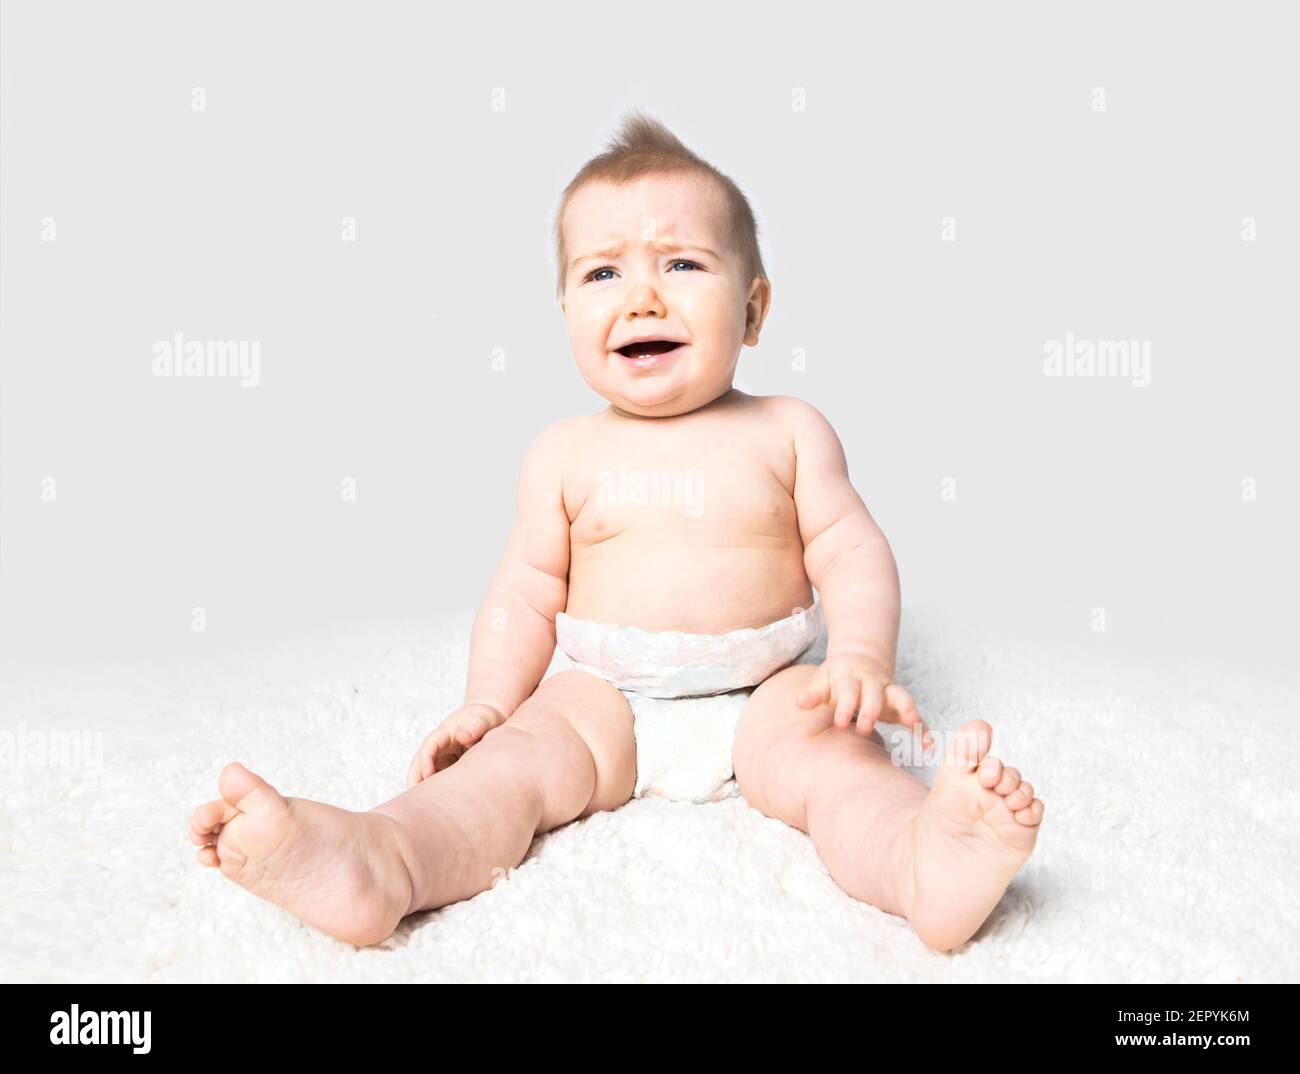 A crying baby on a white background. Stock Photo